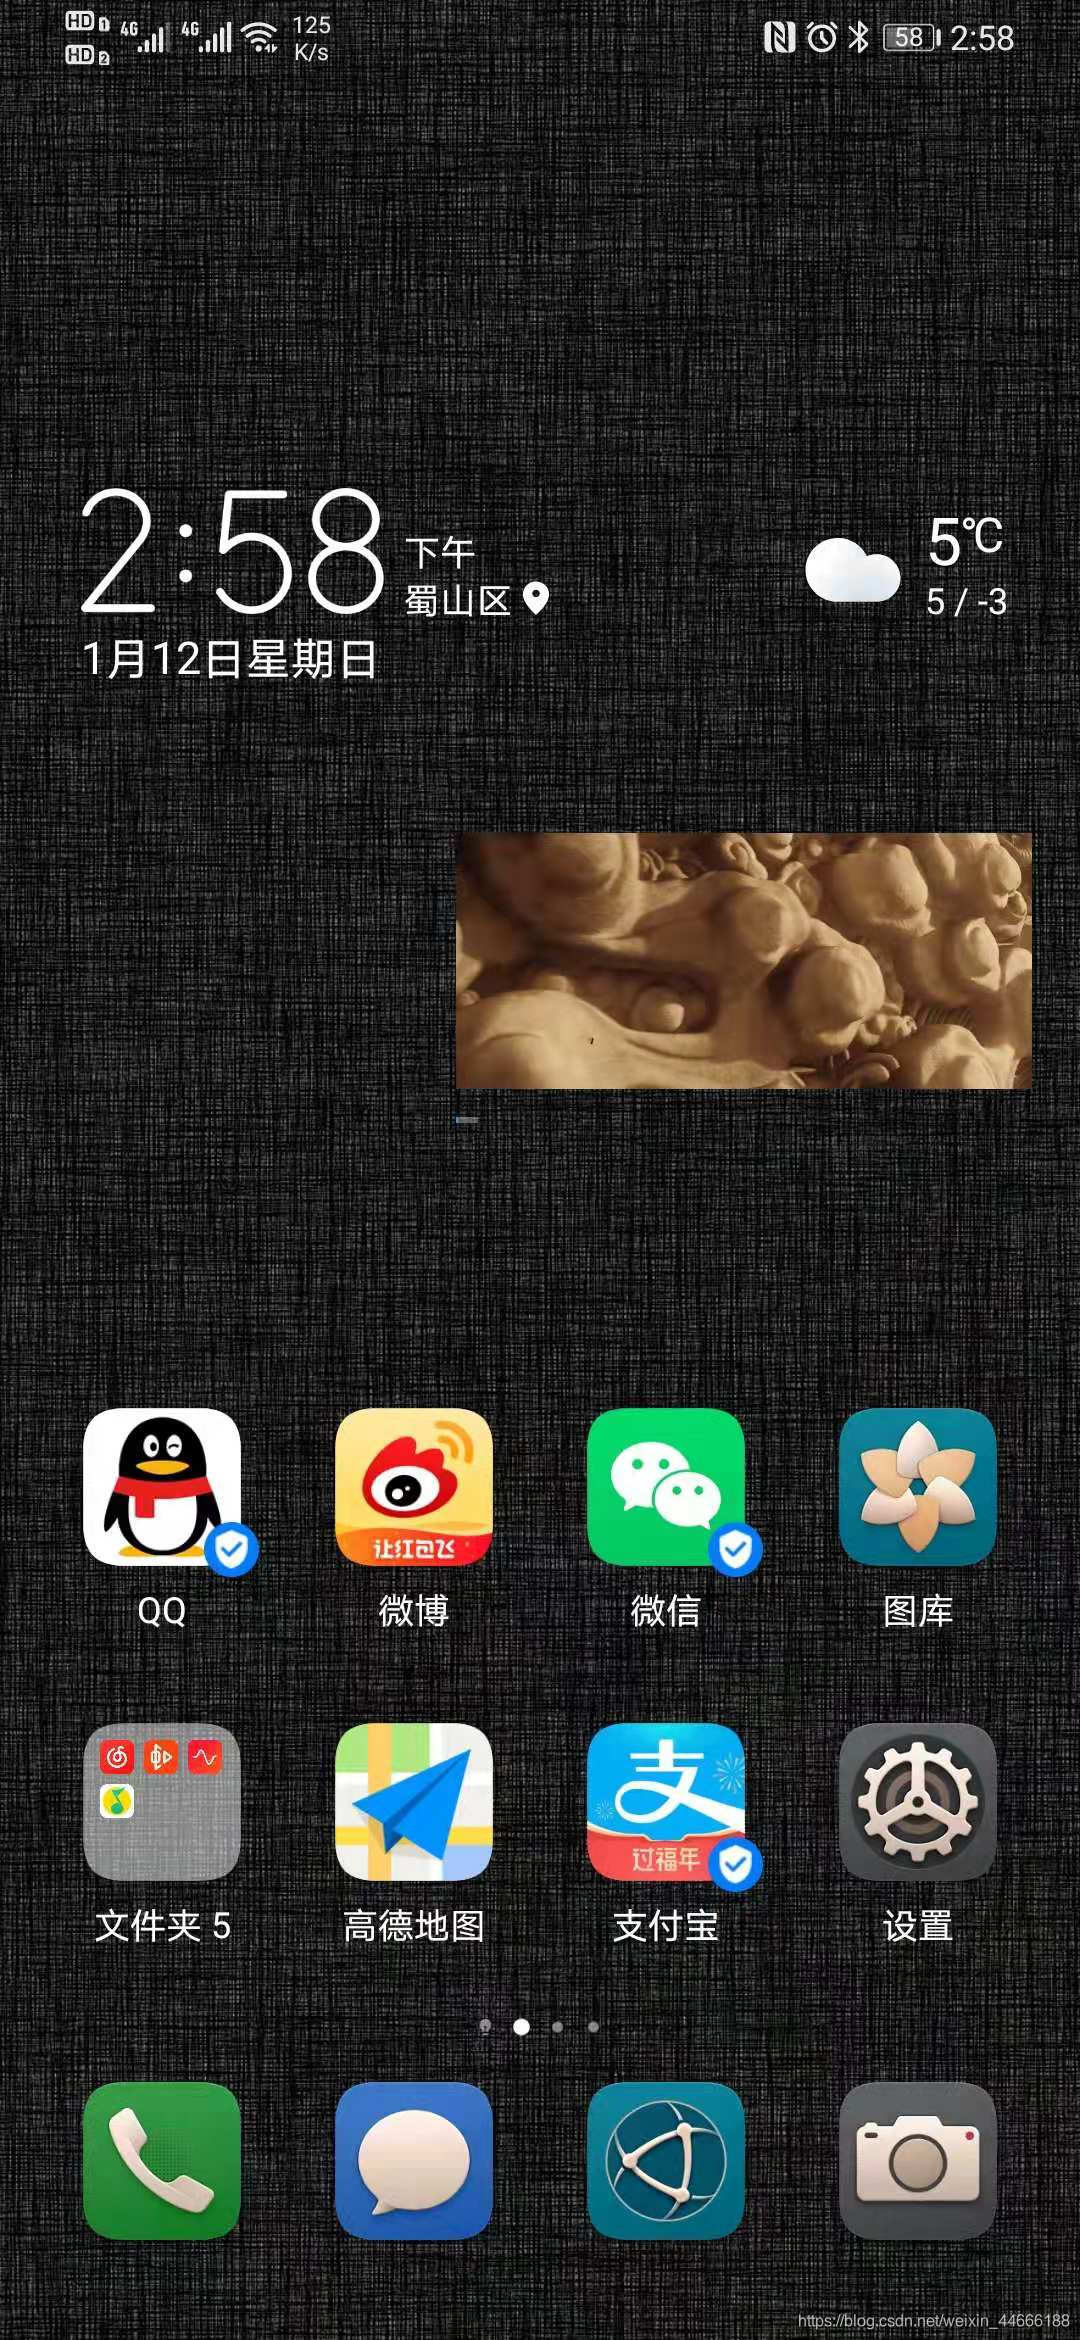 Android小窗口模式，picture-in-picture（PIP画中画）的使用Android小窗口模式，picture-in-picture（PIP画中画）的使用_android